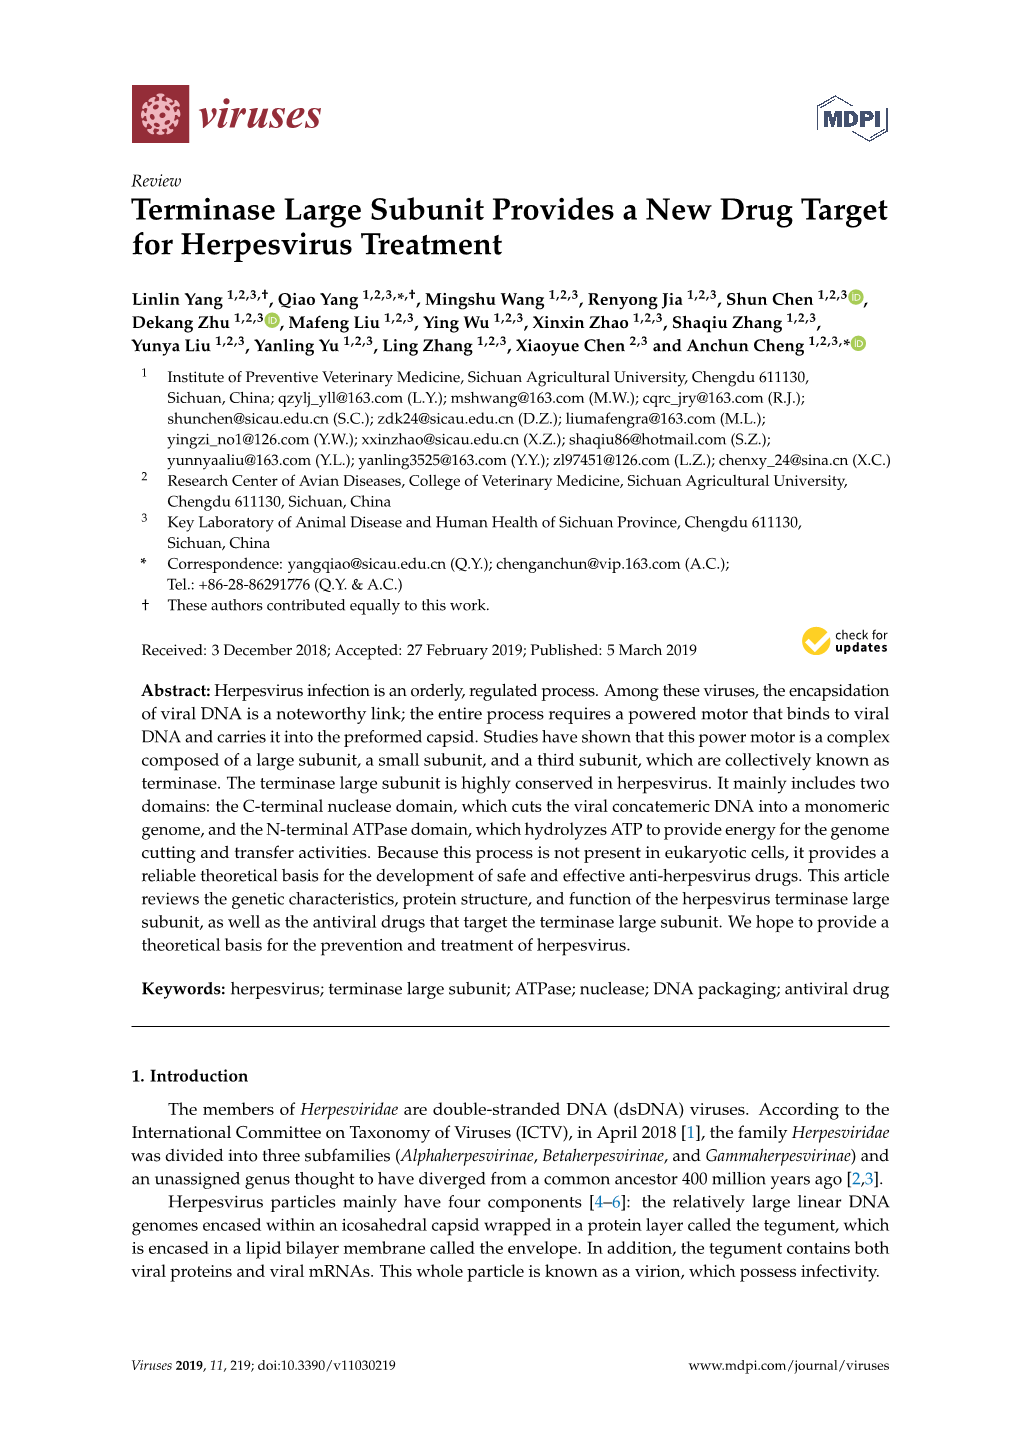 Terminase Large Subunit Provides a New Drug Target for Herpesvirus Treatment